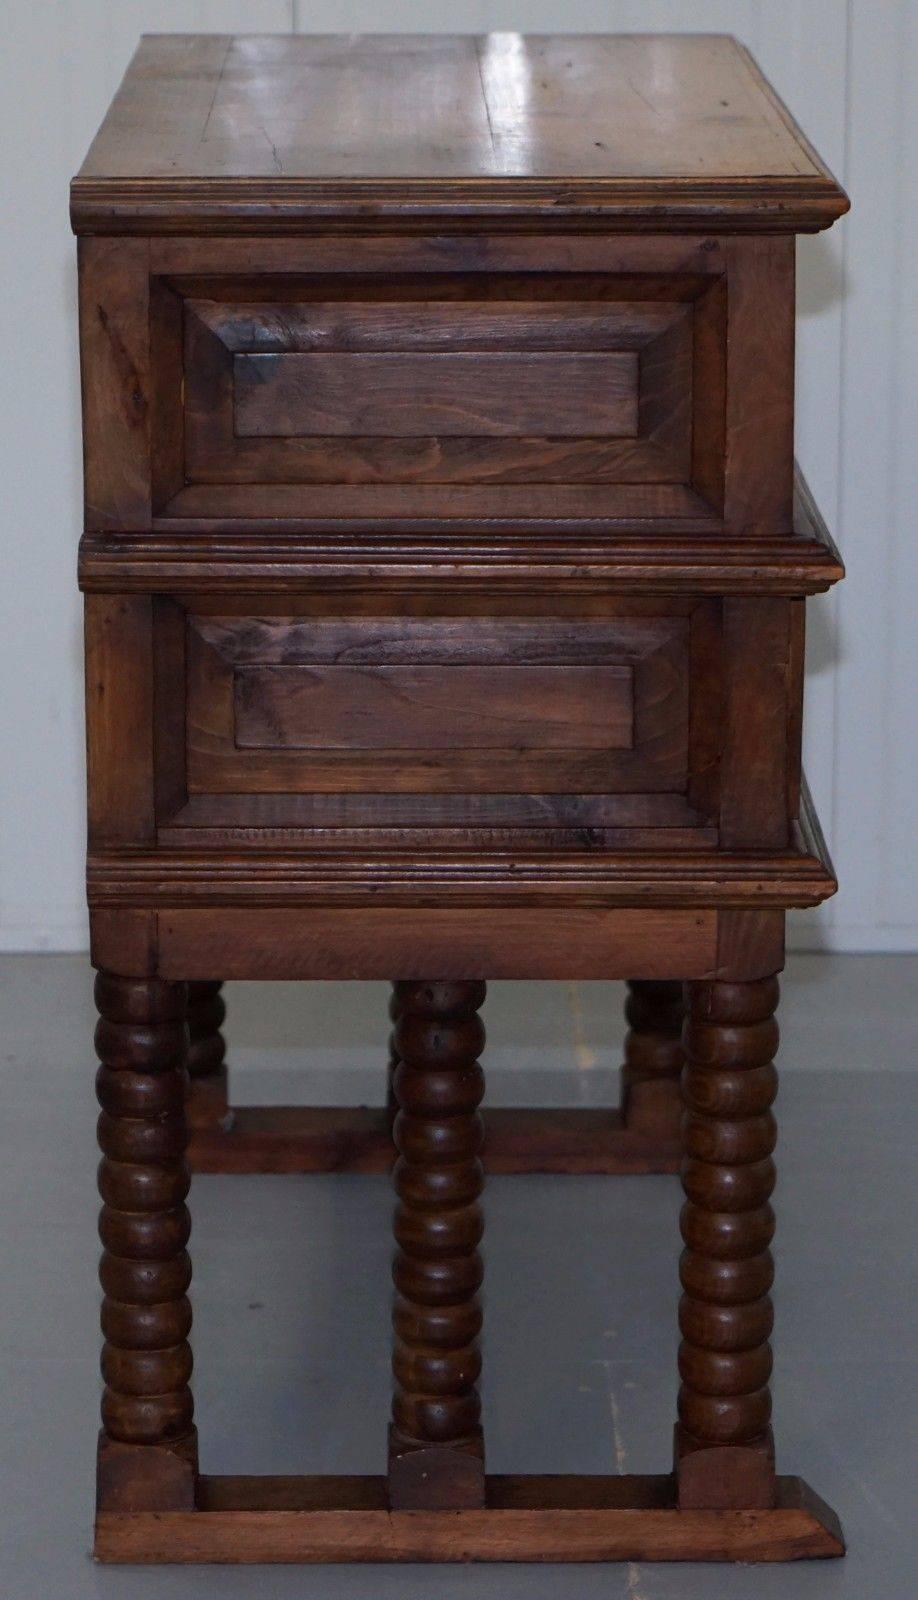 Hand-Carved Solid Oak Bobbin Turned Triple Leg Sideboard Chest of Drawers Great Piece & Size